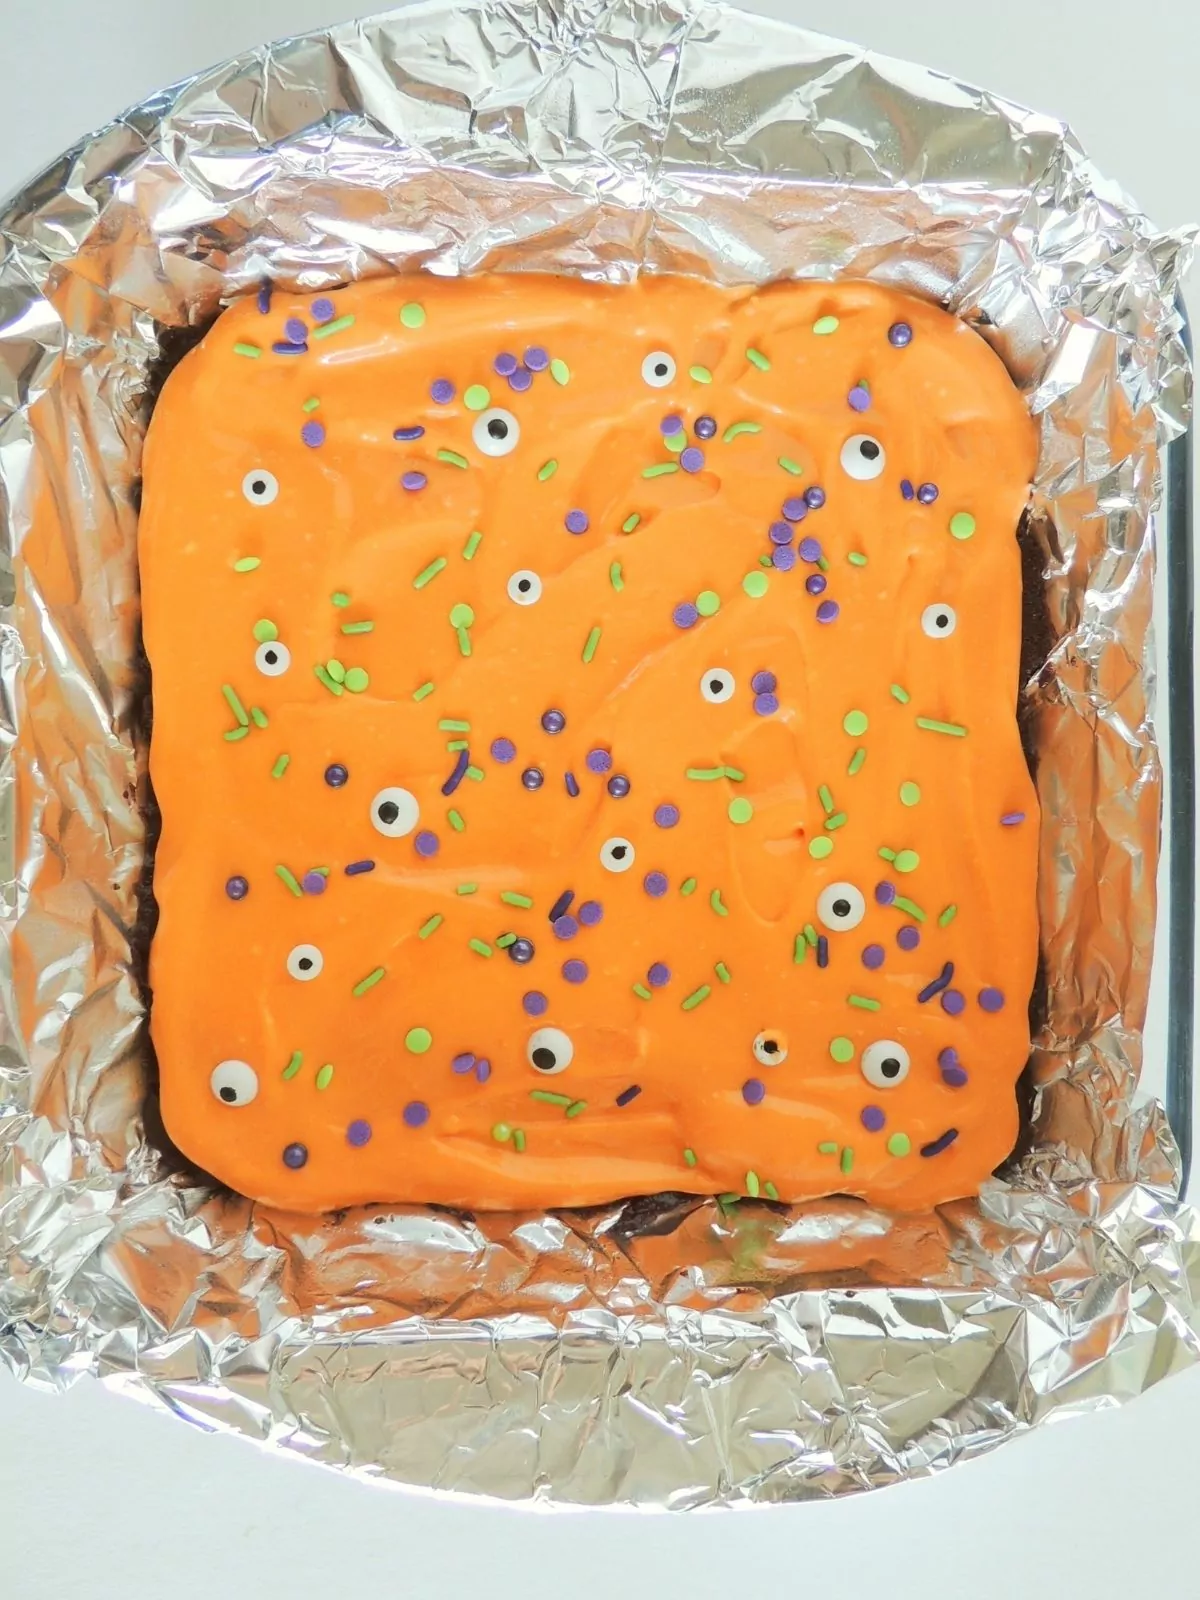 Halloween brownies with orange frosting and googly eyes.